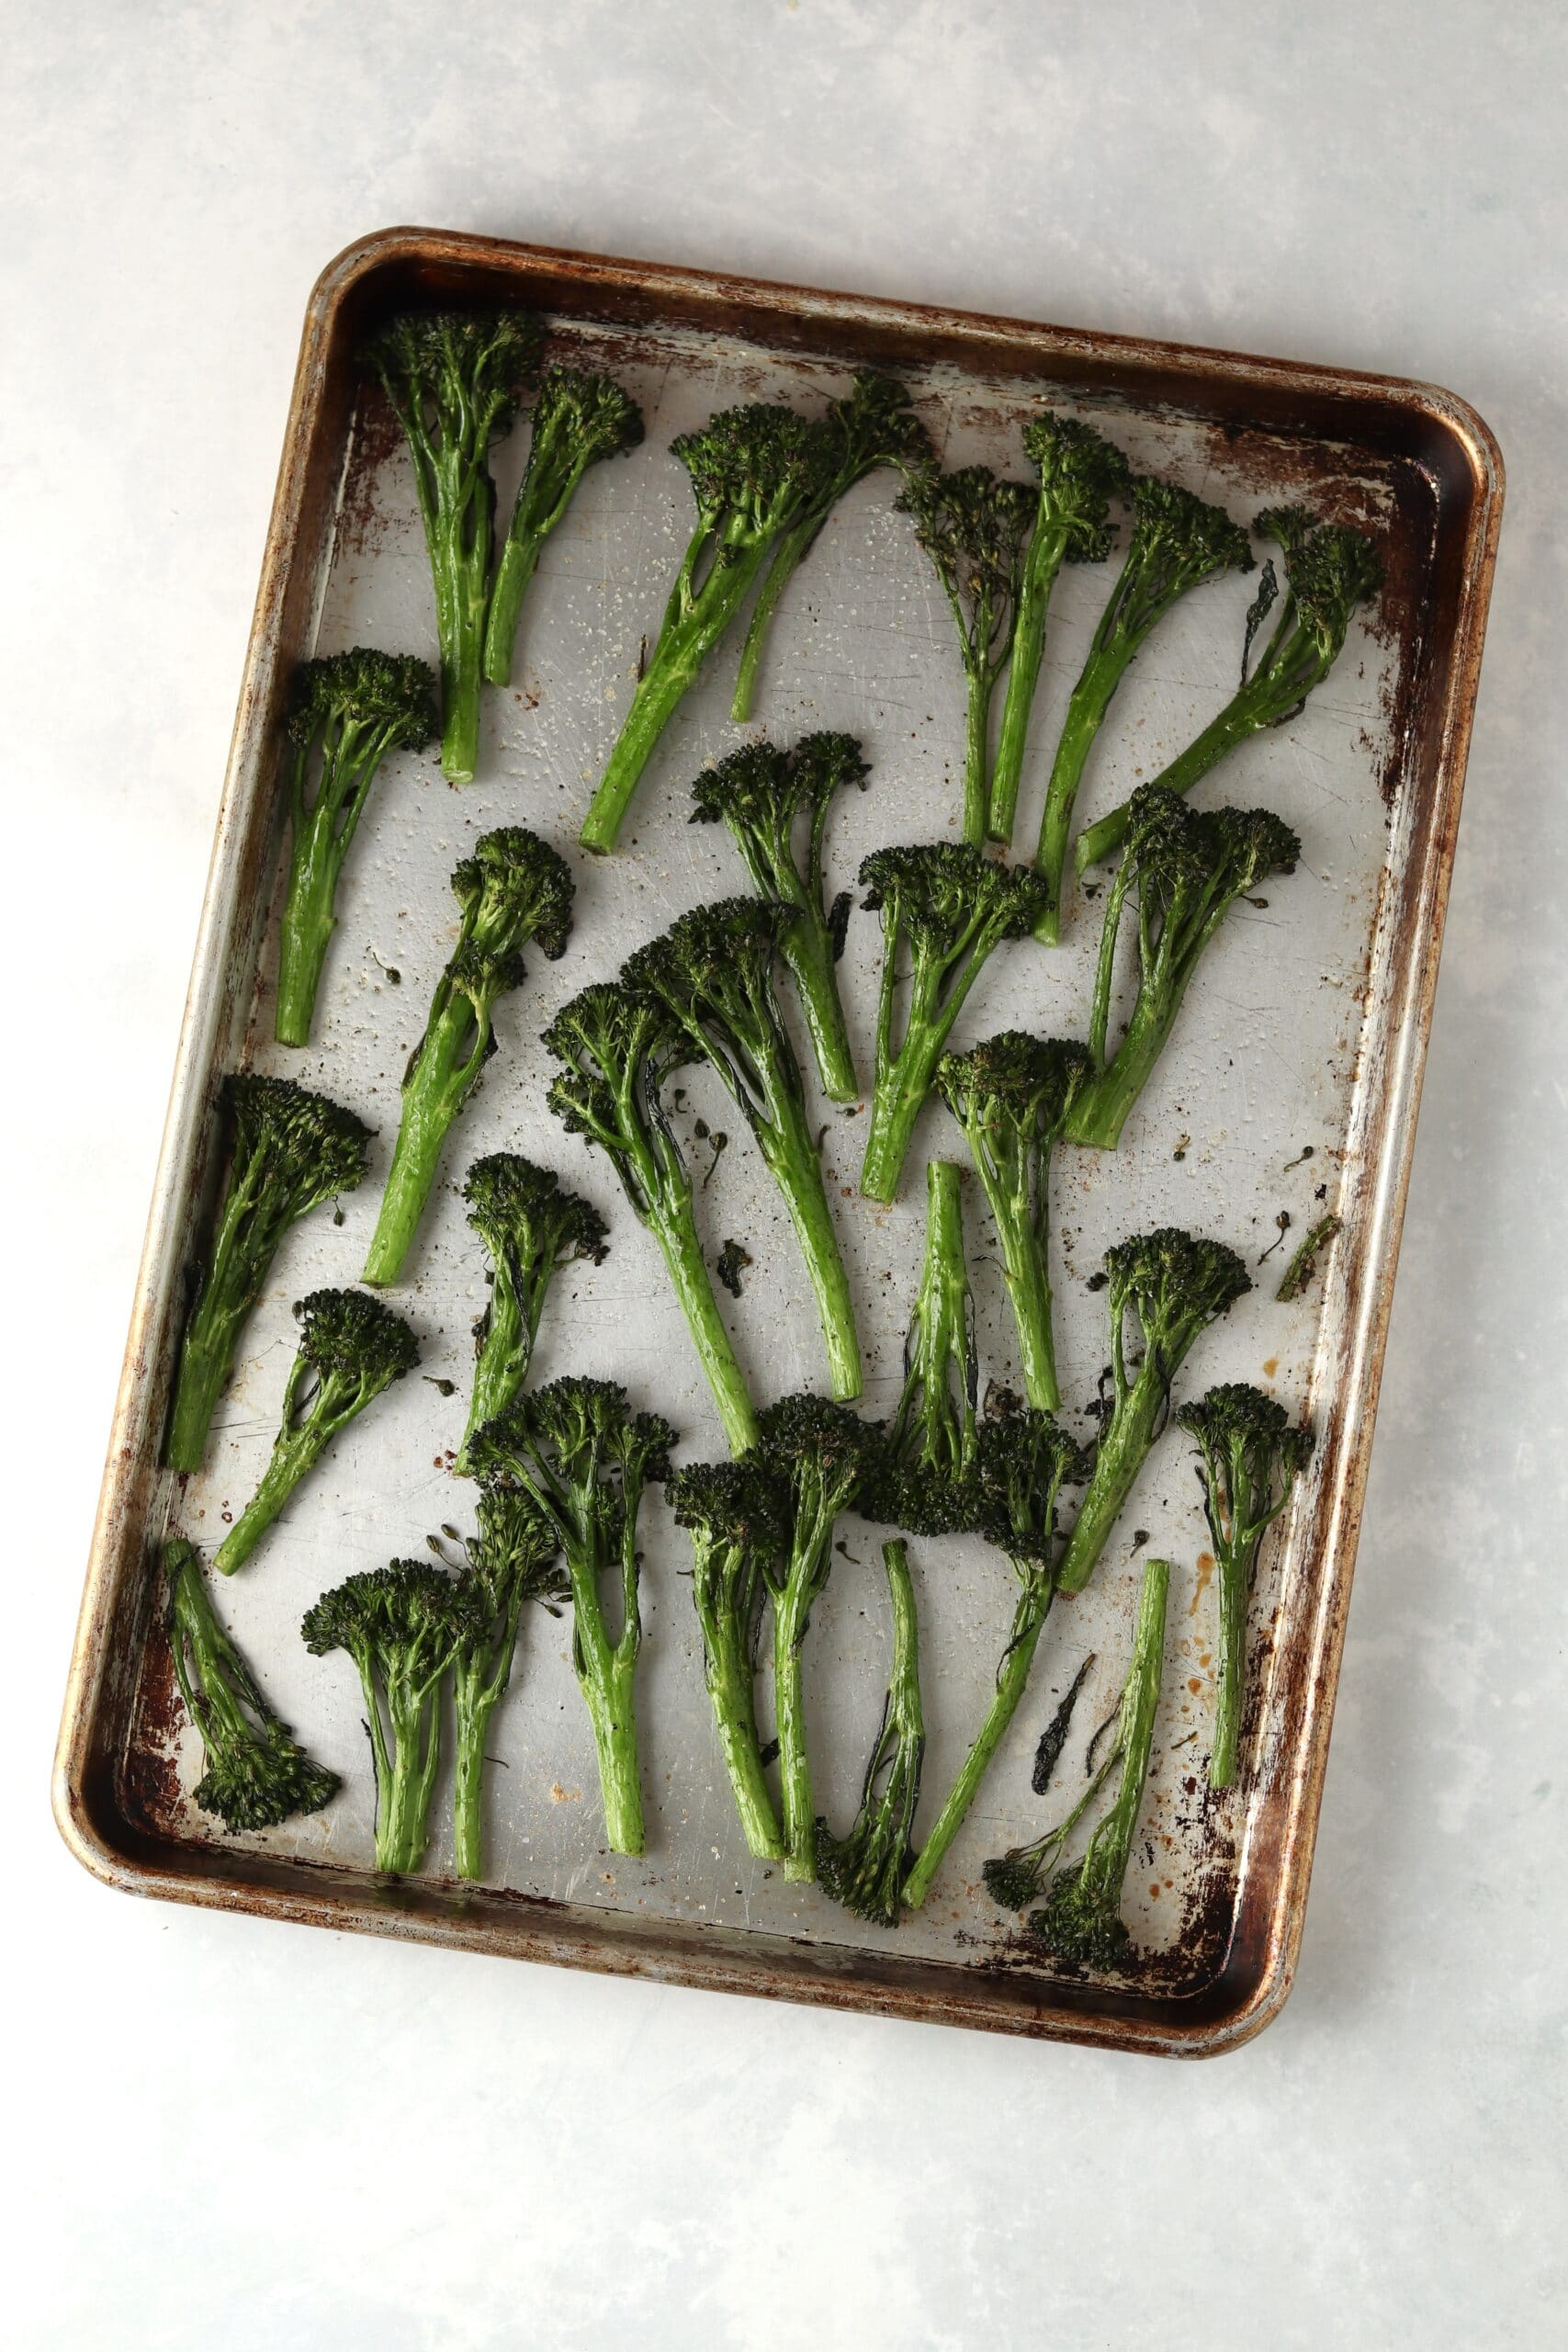 broccolini on a sheet pan after roasting